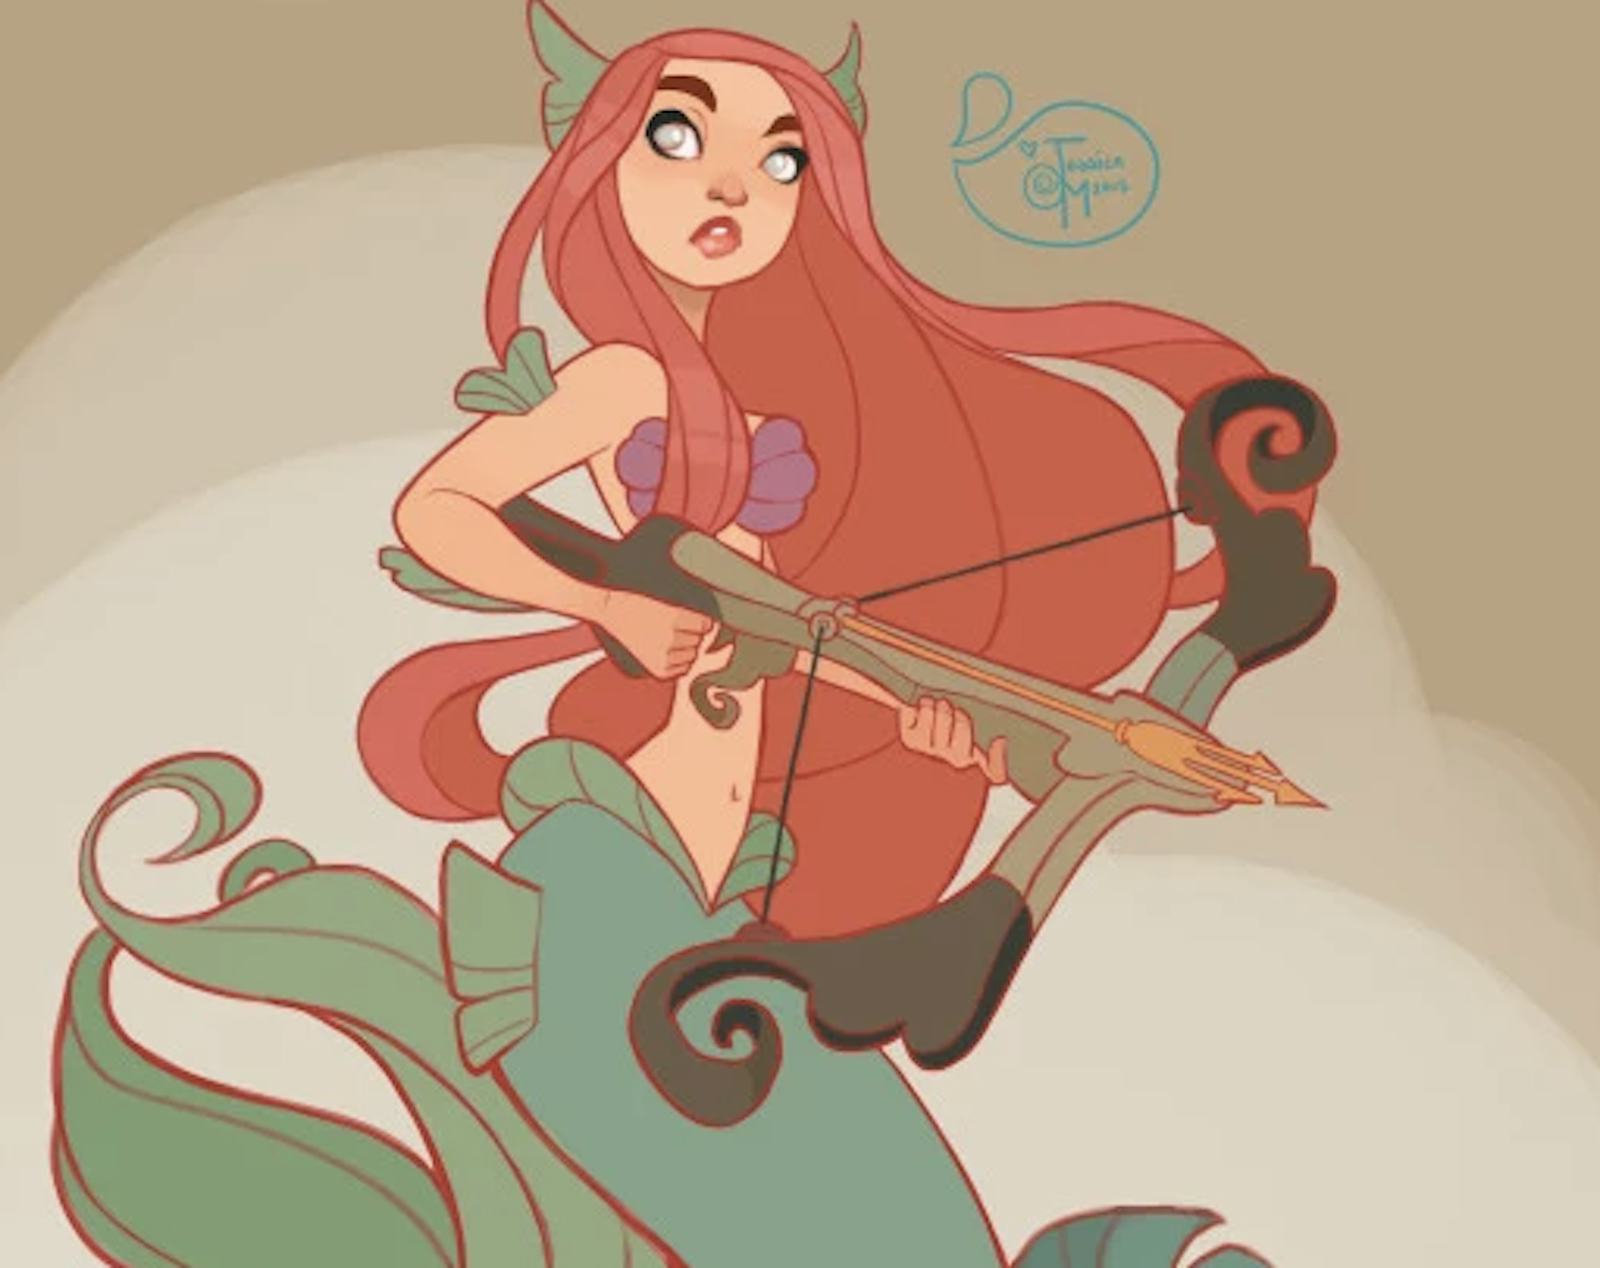 Disney Princesses Reimagined As Warriors Bring Grit To Your Fave Fairy